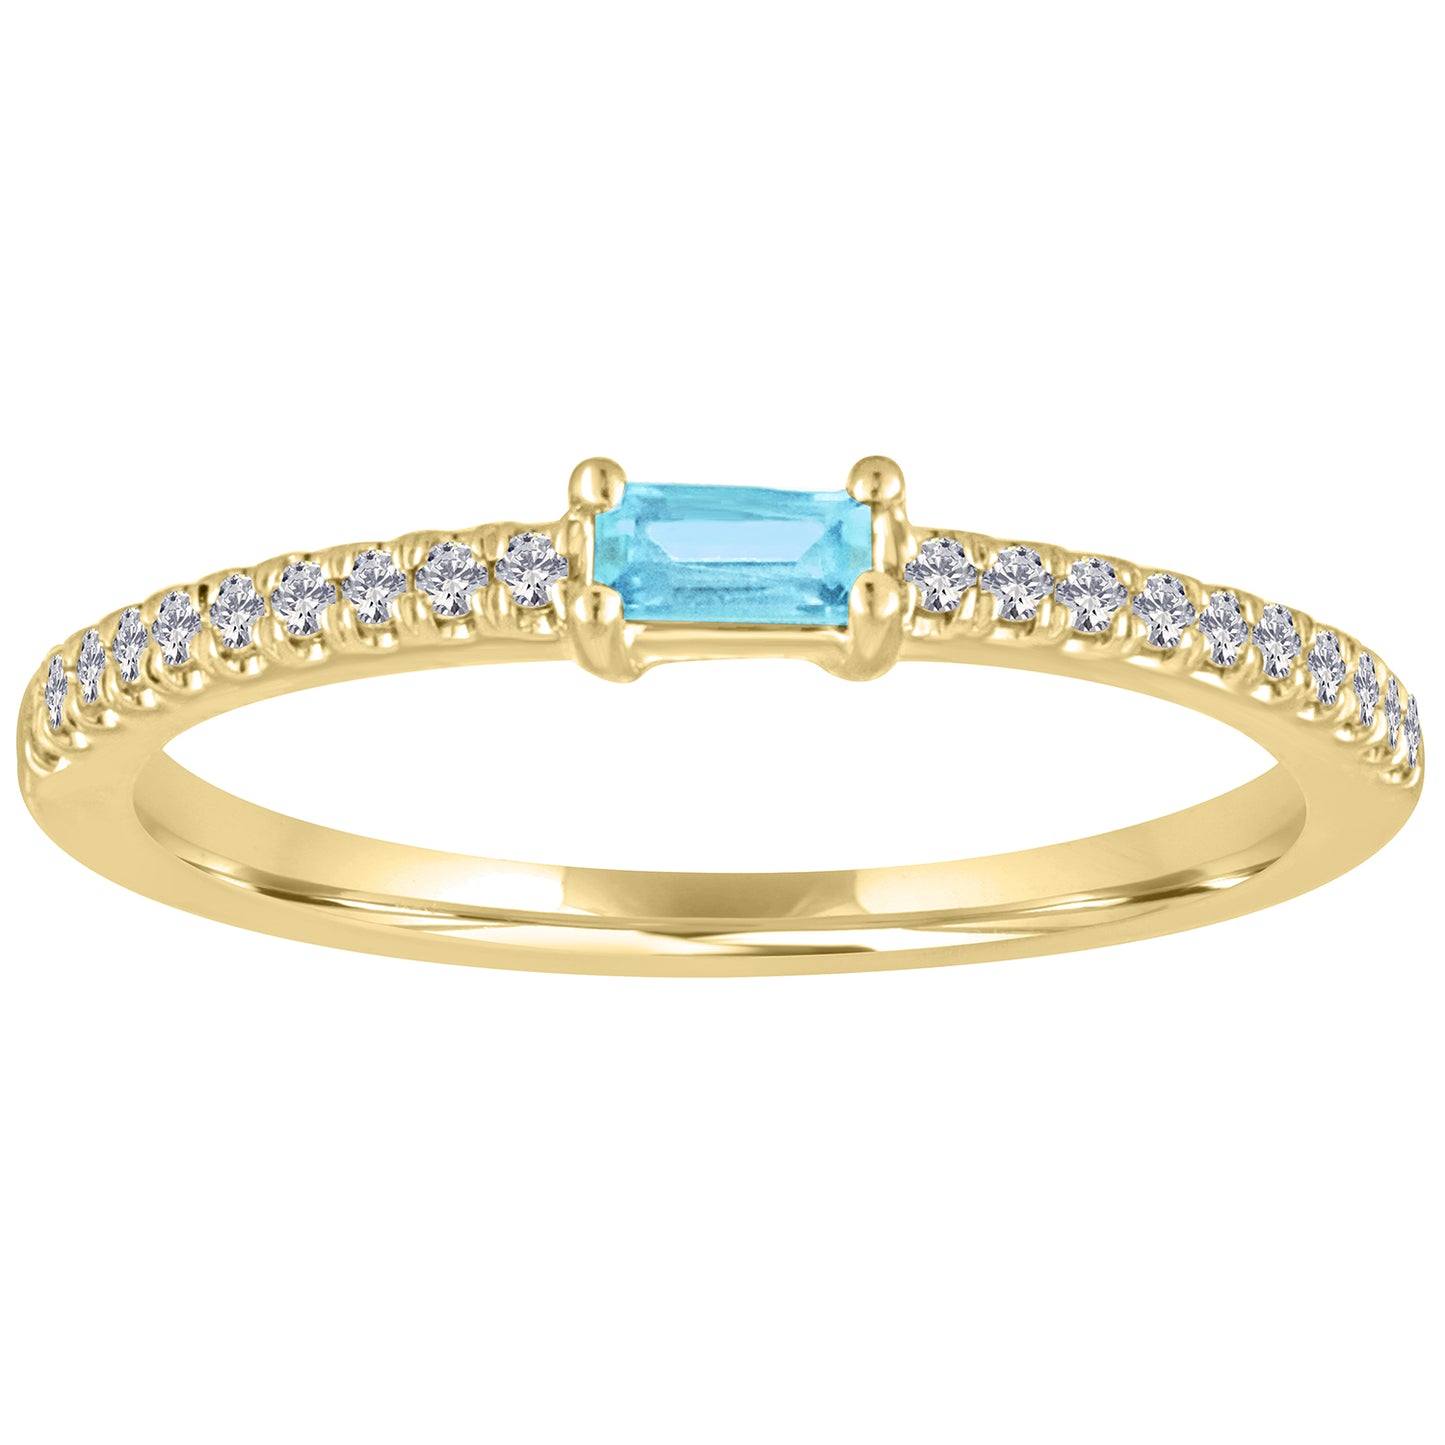 Yellow gold skinny band with an aquamarine baguette in the center and round diamonds on the shank.